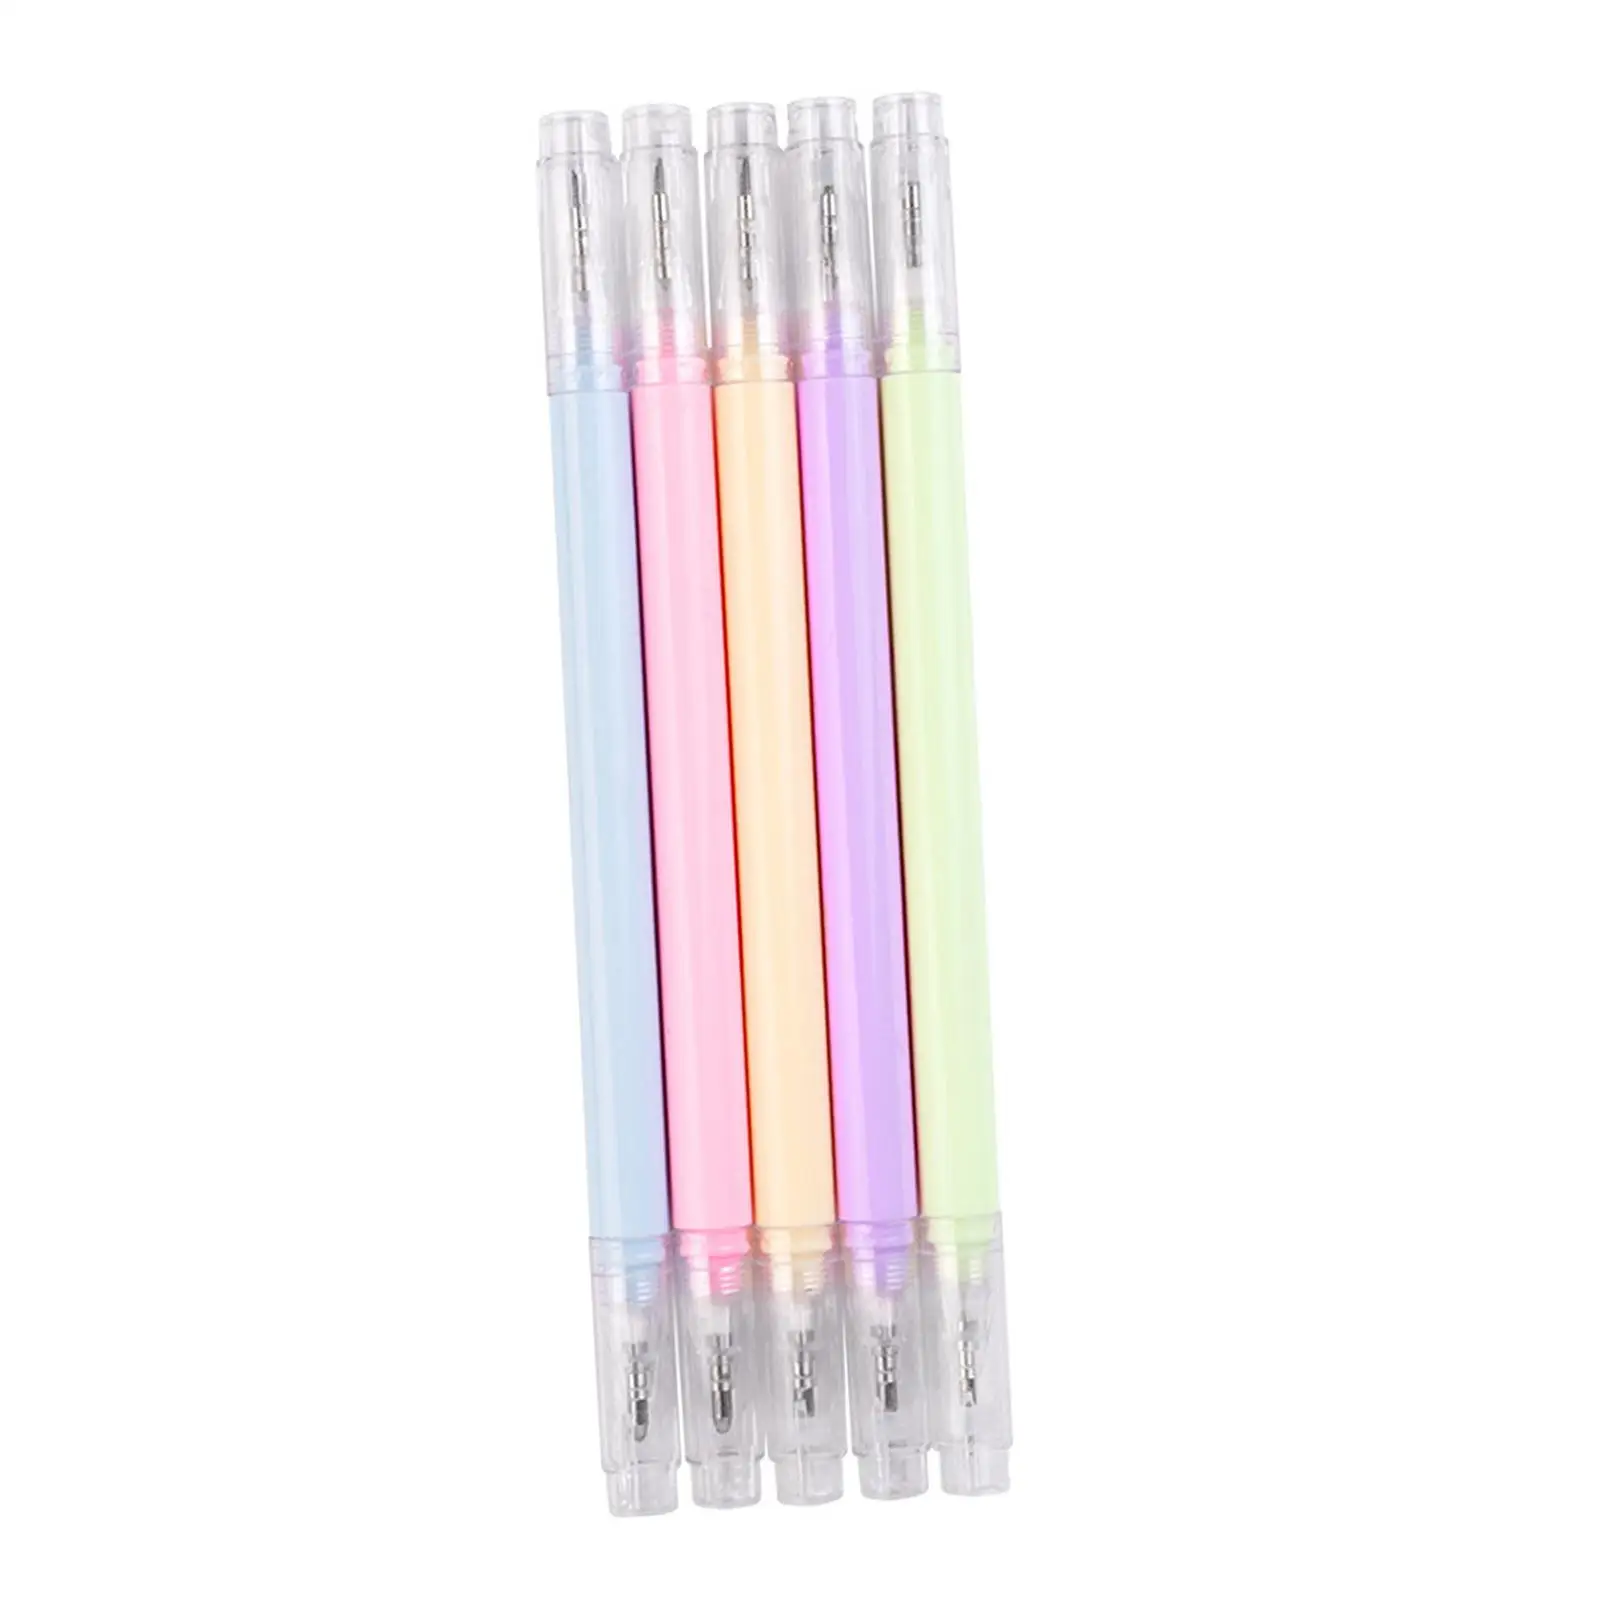 5Pcs Creative Paper Cutter Pens Utility for Scrapbooking Card Making Craft